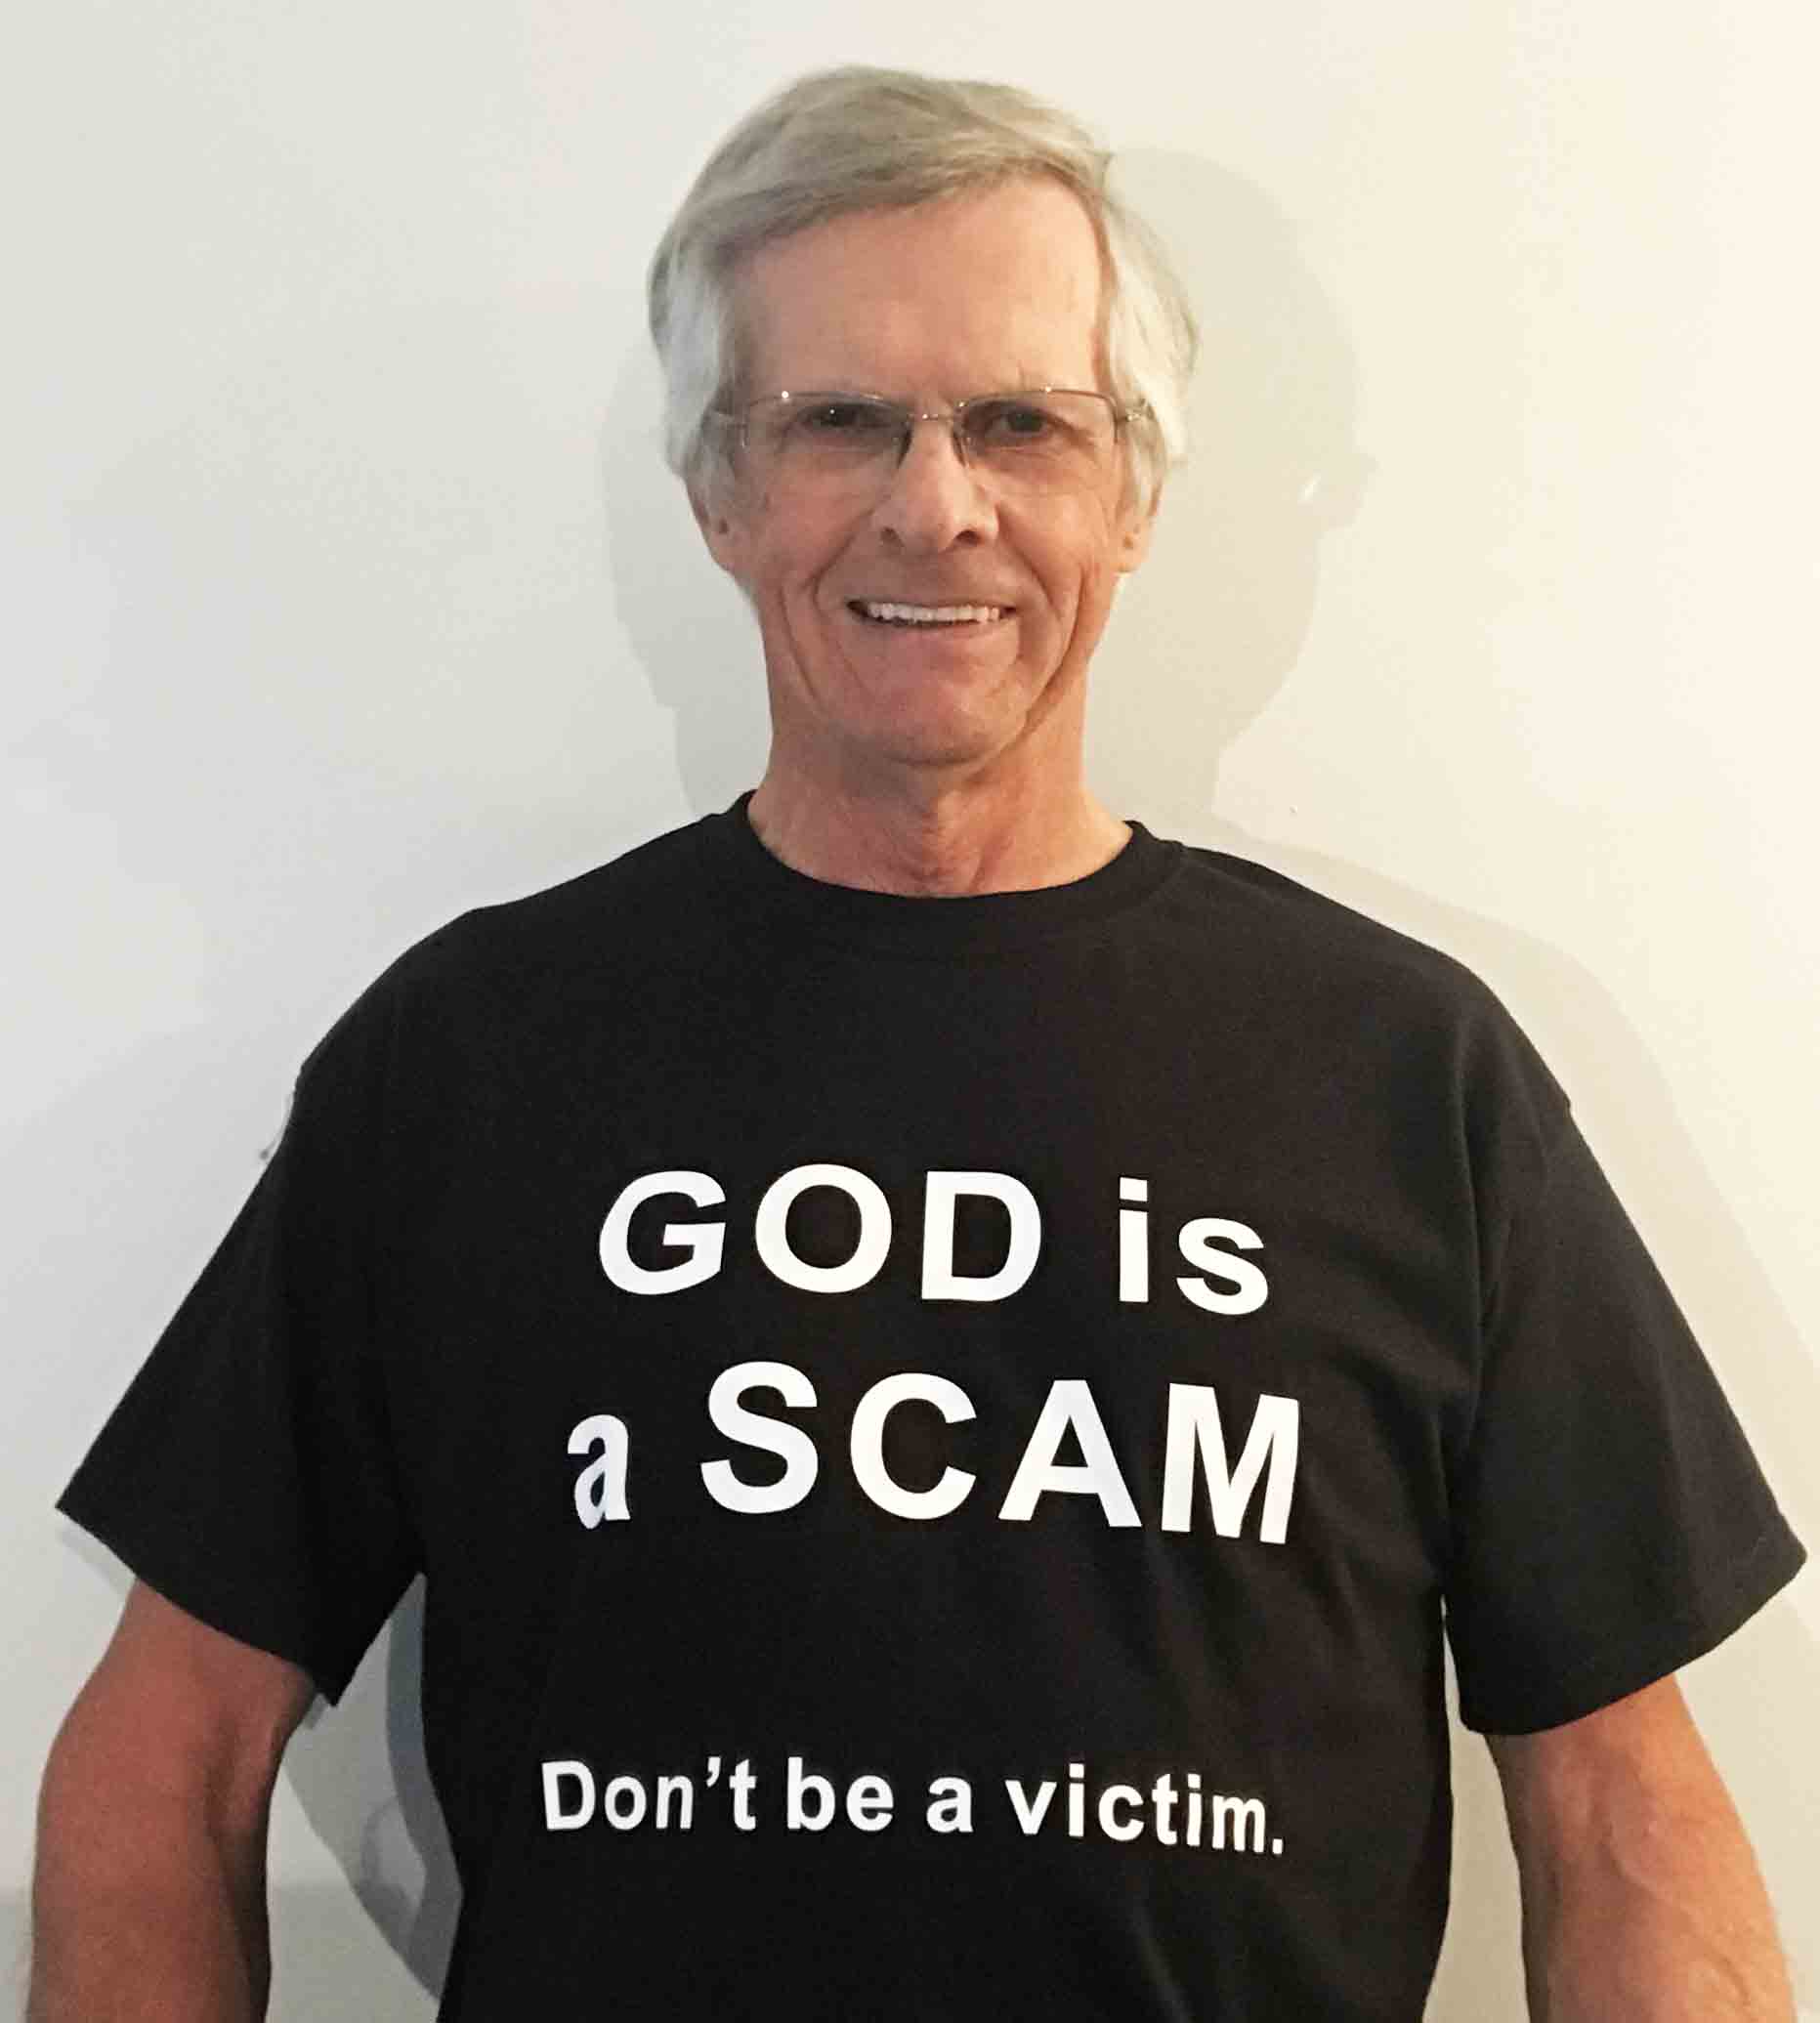 Darwin Bedford wearing his shirt that says 'GOD is a SCAM, Don't be a victim.'